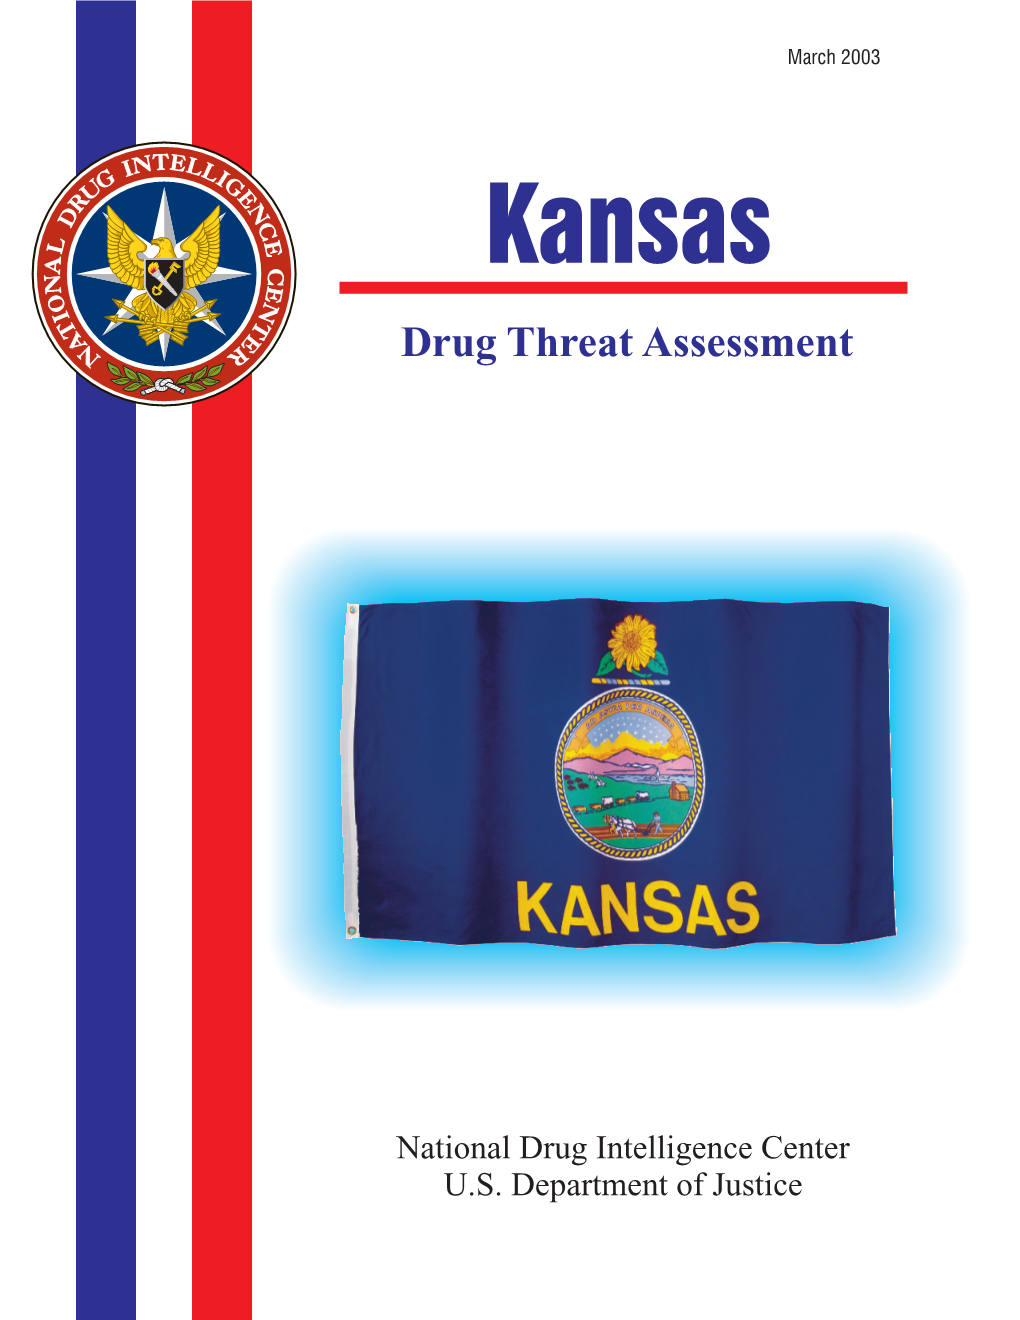 Cocaine, Particularly Crack, Poses a Significant Drug Threat to Kansas Largely Because of Crack’S Highly Addictive Nature and Association with Violent Crime